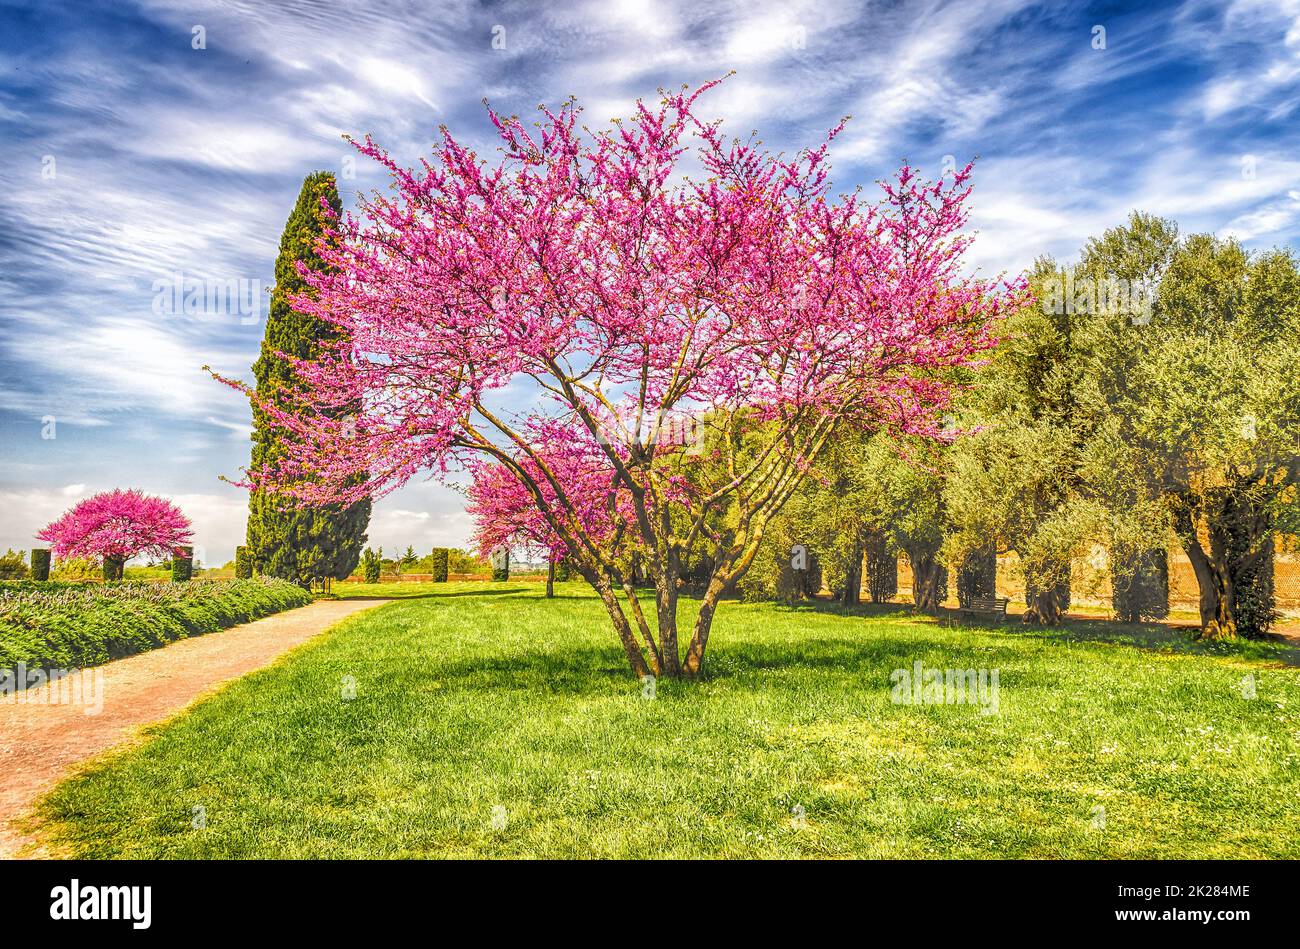 Beautiful garden with flowered cherry trees, cypresses and olive trees Stock Photo